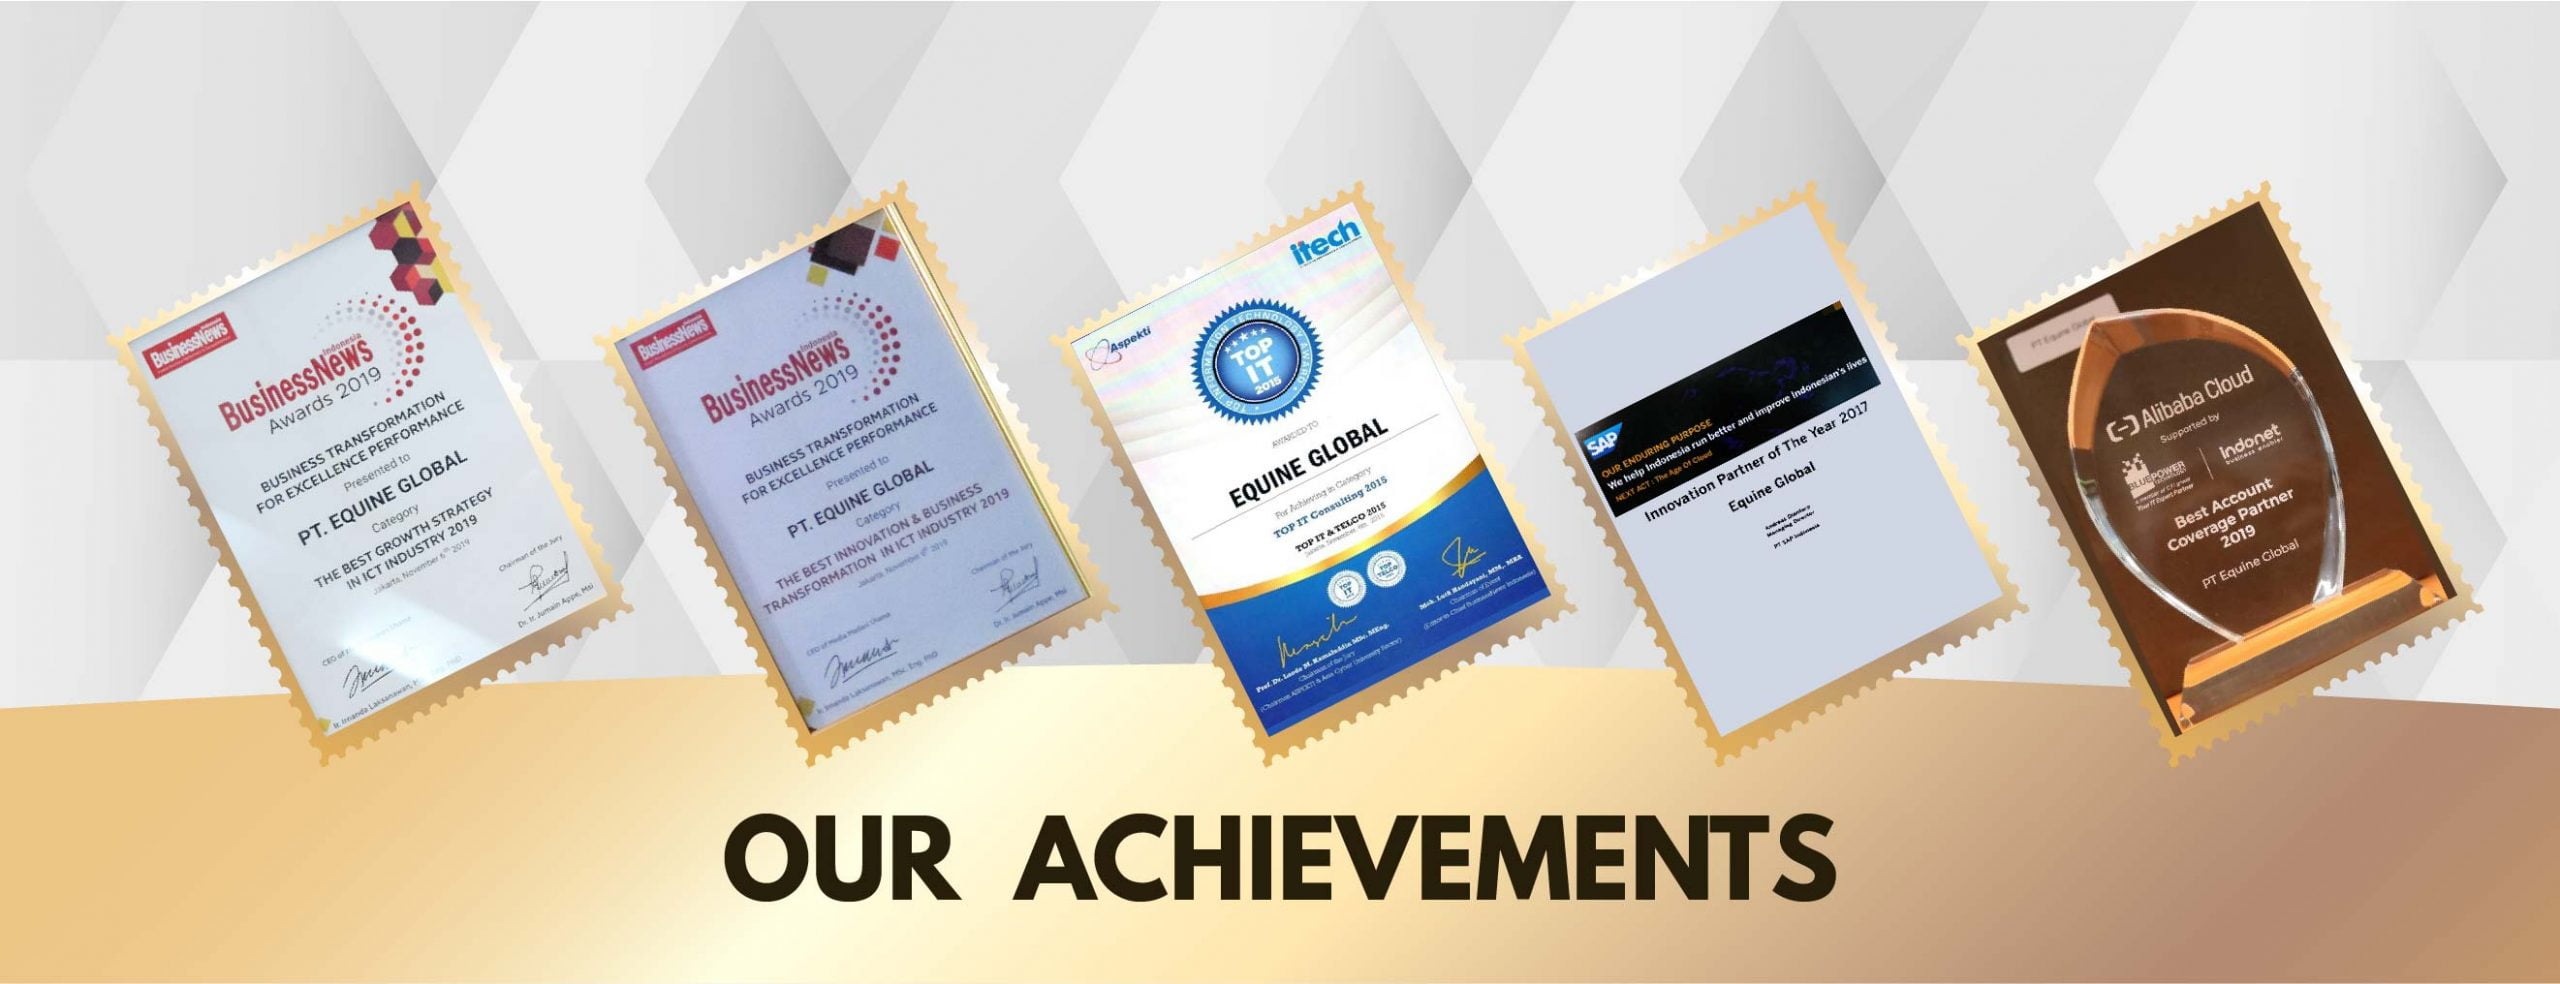 Achievements - Equine Global - S/4HANA - SAP Indonesia - SAP ERP - IT Consulting - ISO 27001